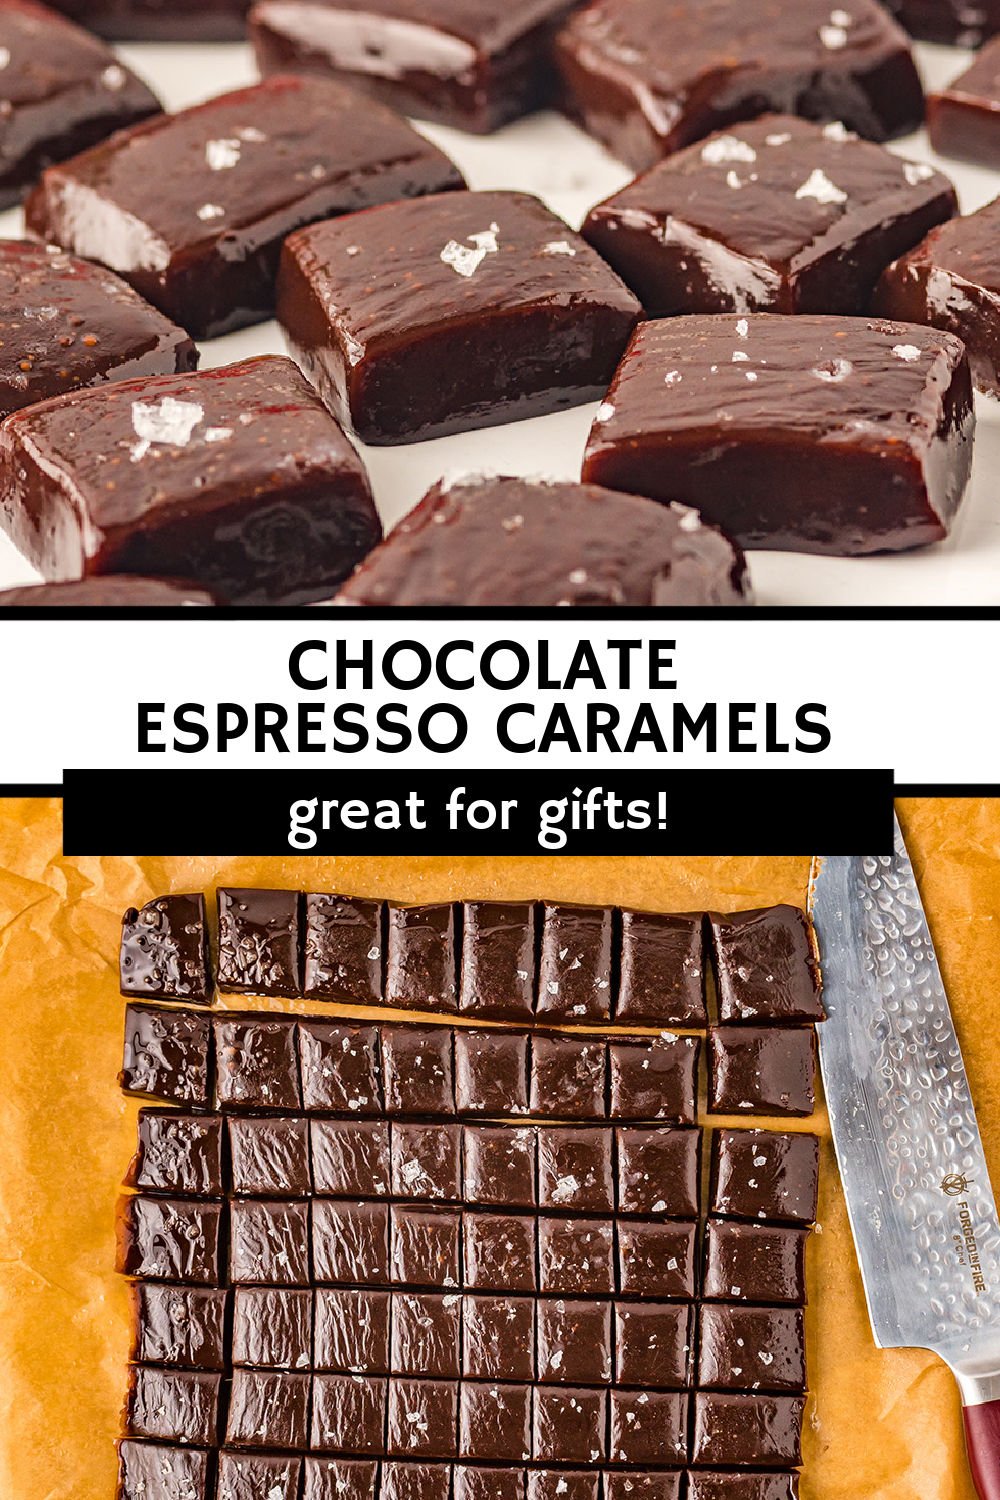 Sea Salt Chocolate Espresso Caramels - decadent cocoa powder, full-bodied, silky heavy cream, pure vanilla,  espresso, and flavor amplifying sea salt come together to make a gloriously soft, chewy caramel that is rich, intense, and perfectly balanced. If you're looking for a new caramel recipe - this is IT!